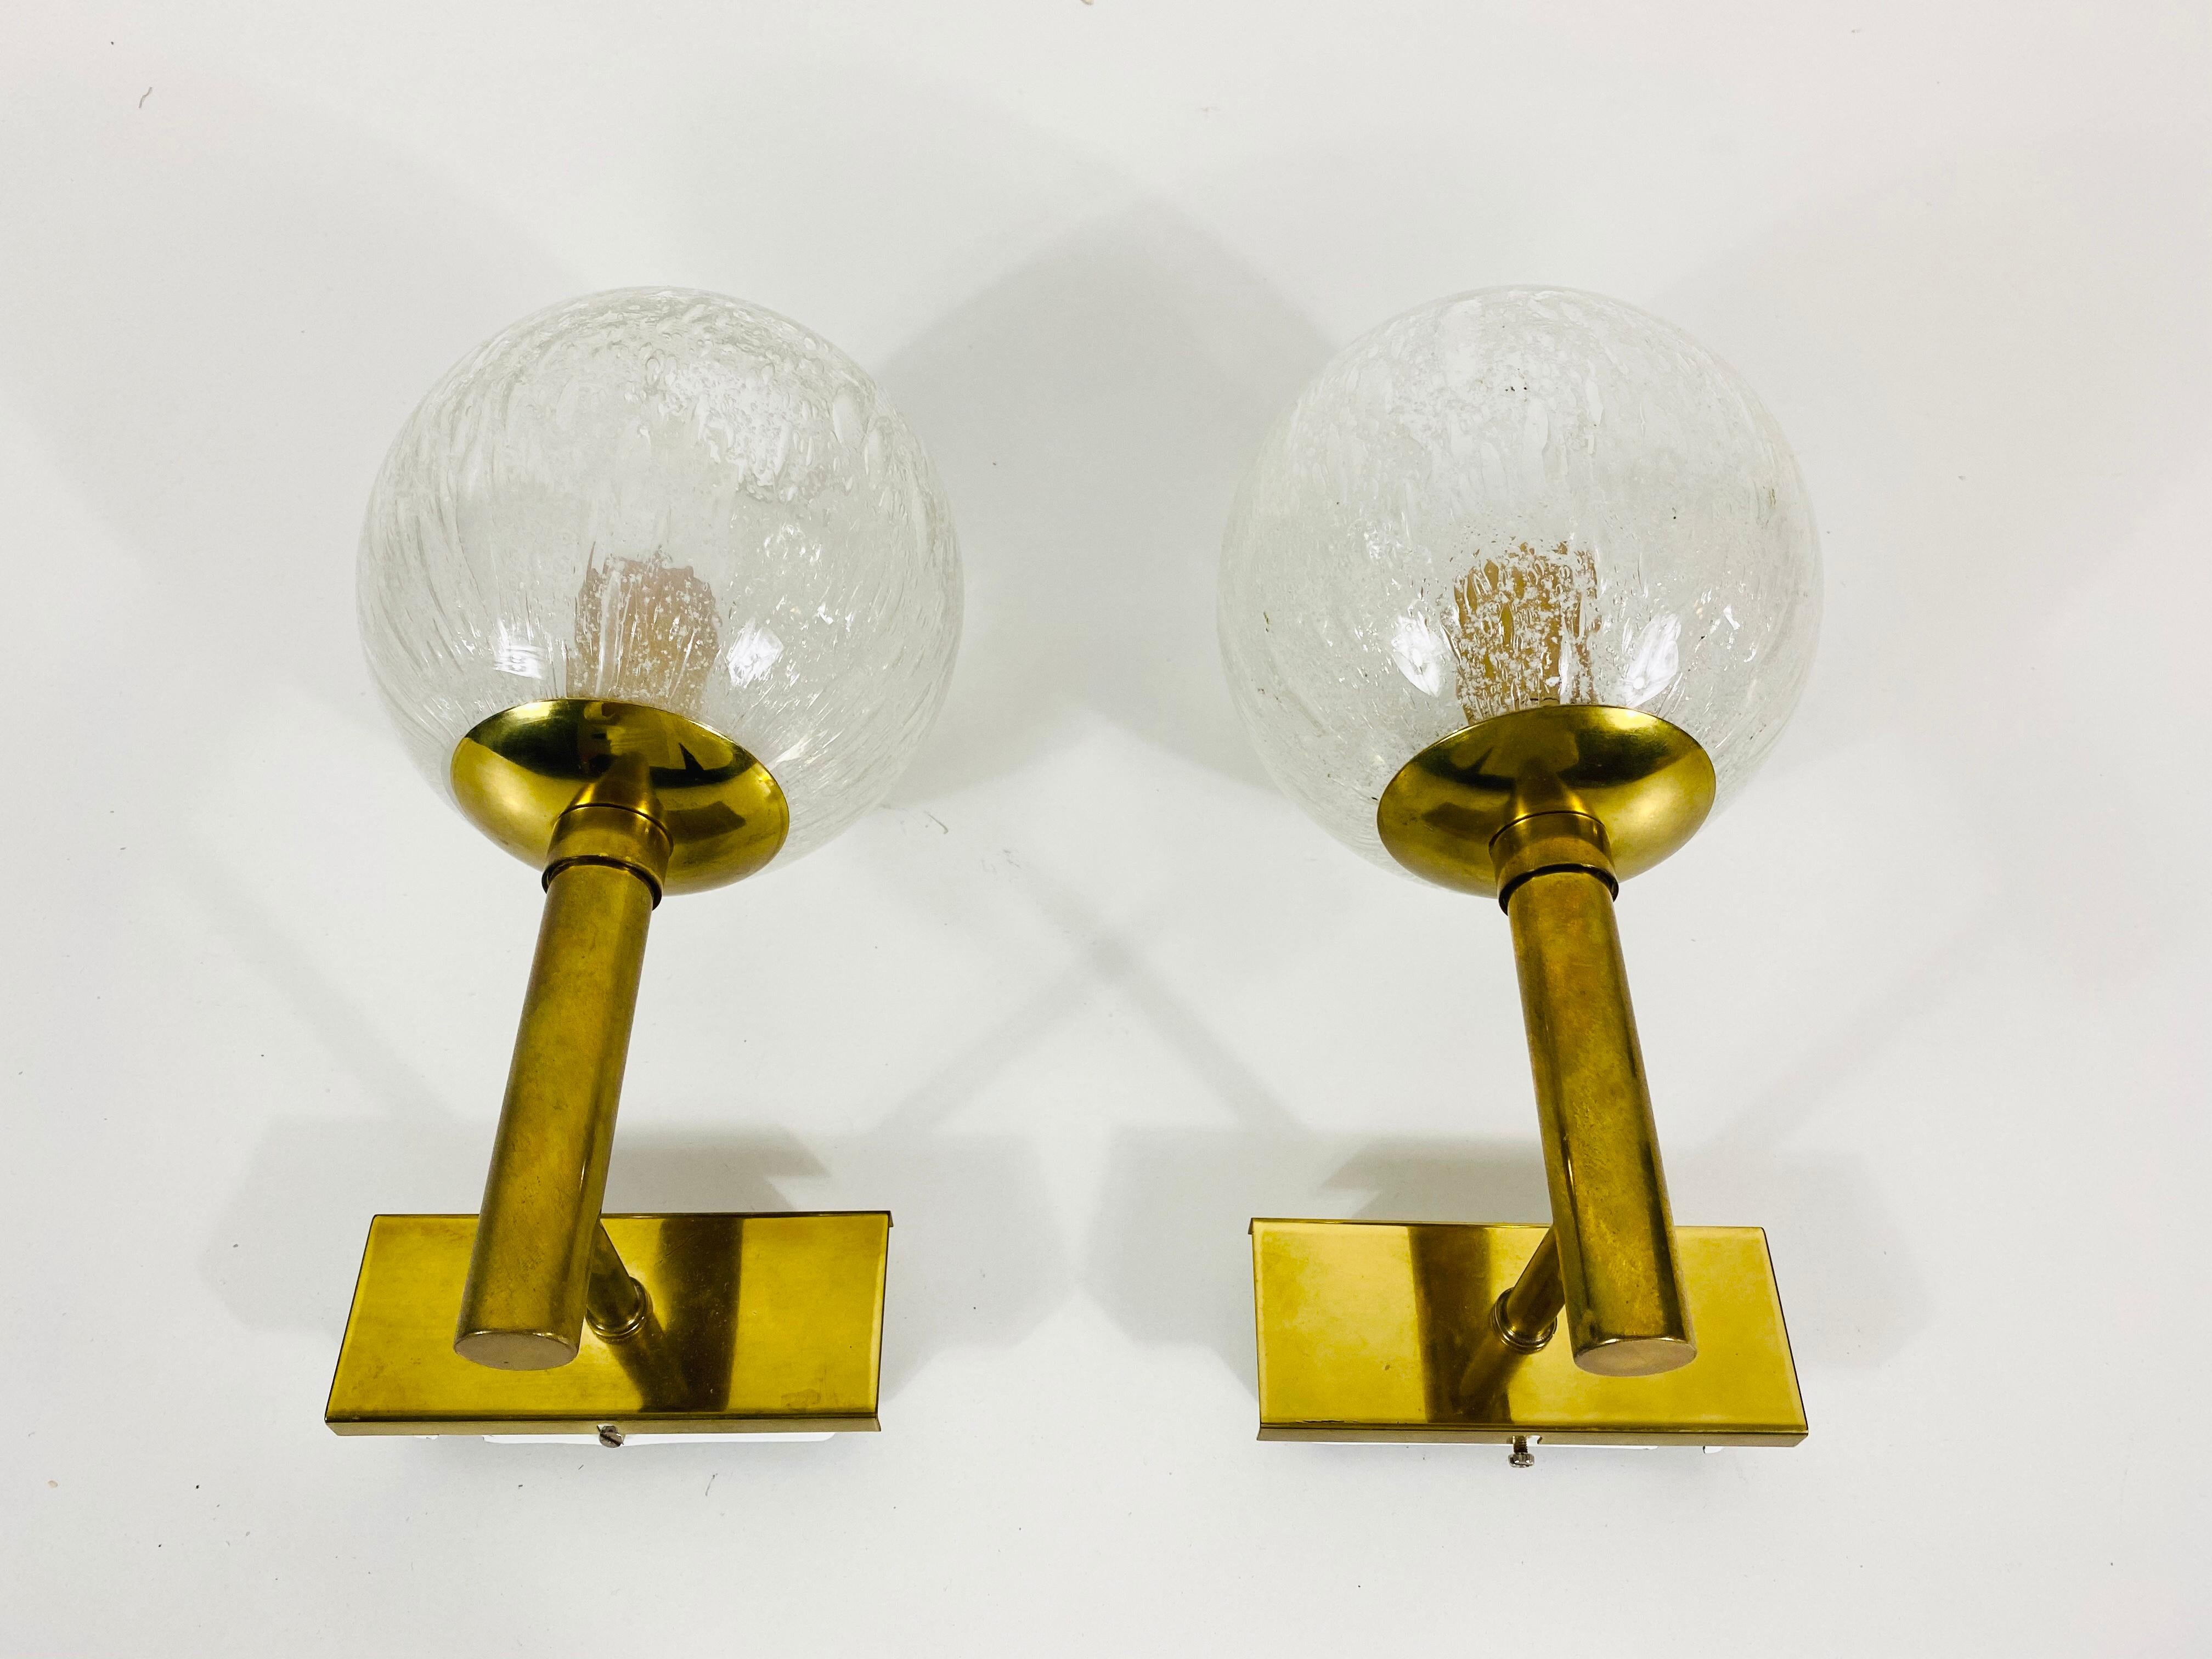 A pair of wall lamps by Hillebrand Leuchten made in Germany in the 1960s. It is fascinating with its rare glass shape. The bottom part of the lamp is made of brass. 


The light requires one E14 light bulb. Very good vintage condition.

Free